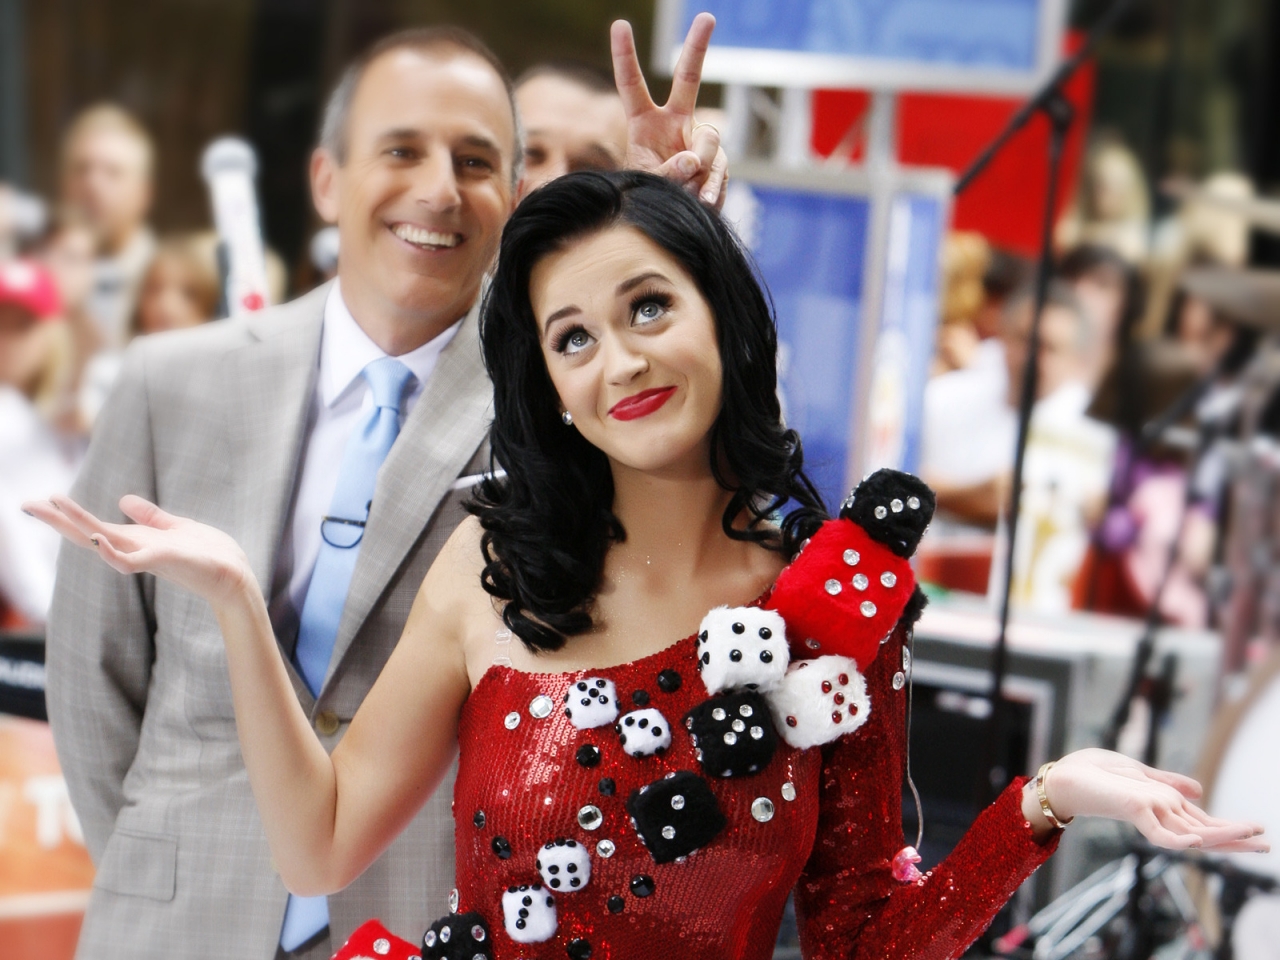 Funny Katy Perry for 1280 x 960 resolution